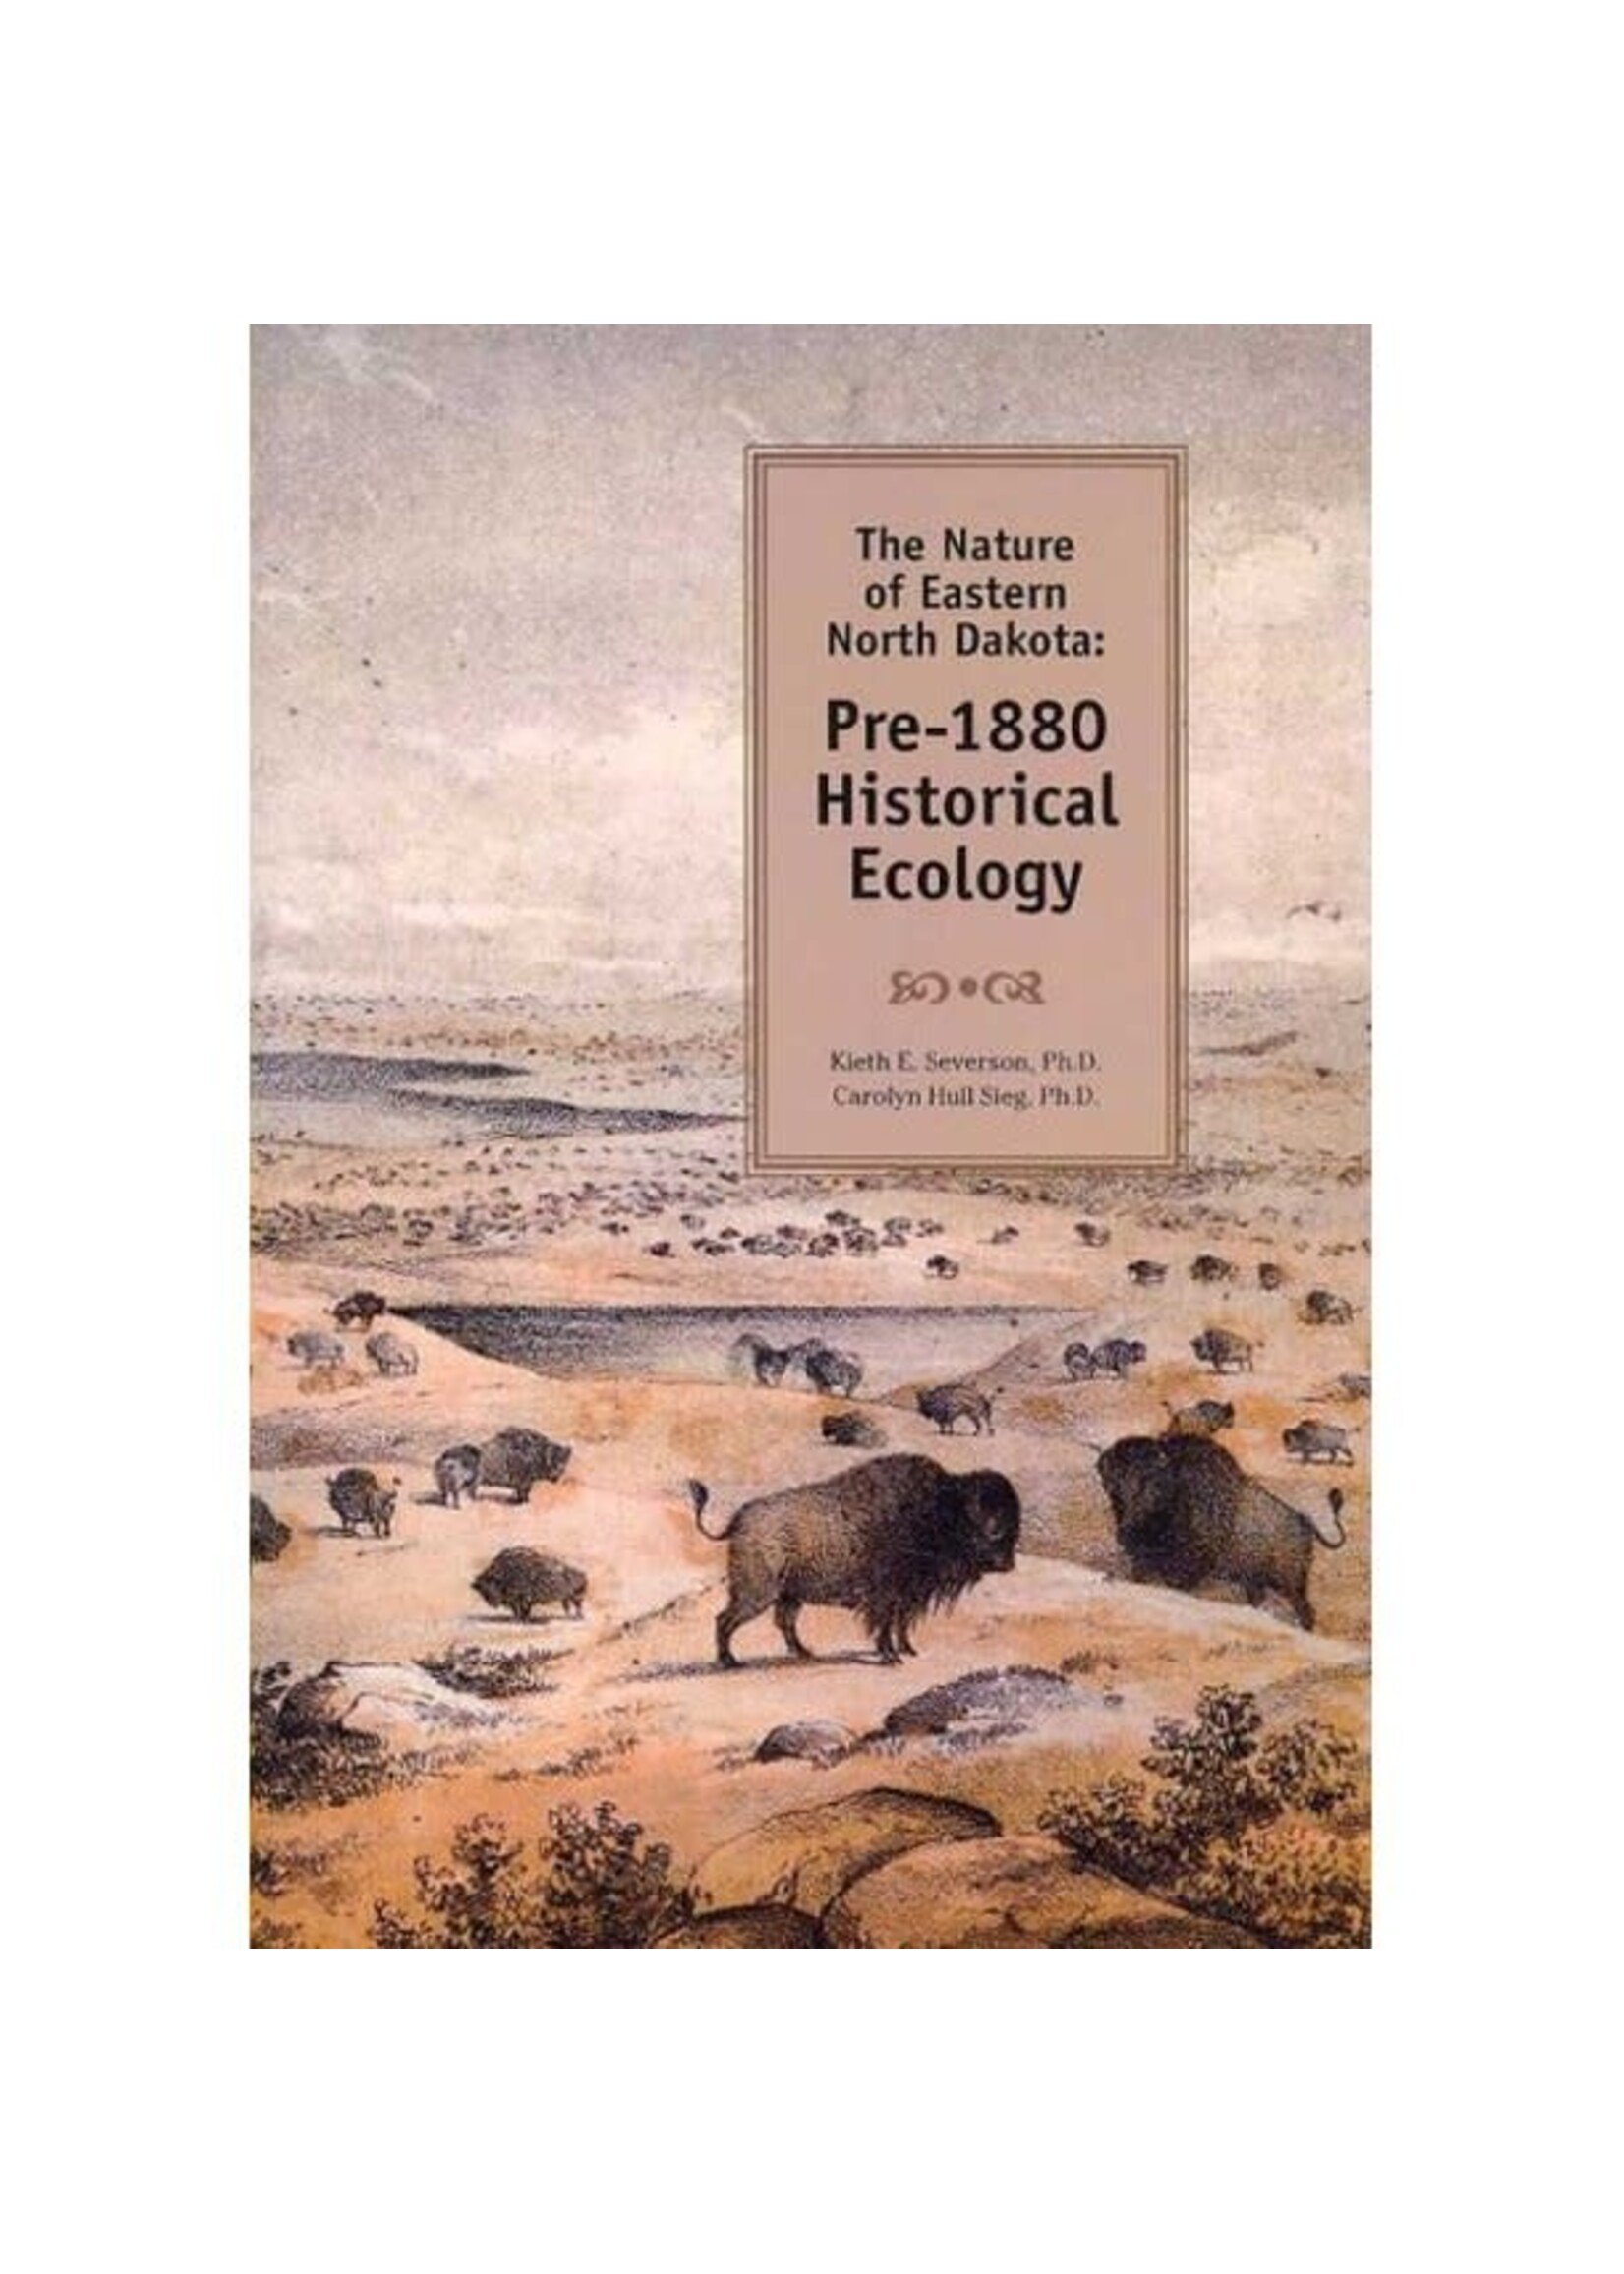 The Nature of Eastern North Dakota: Pre-1880 Historical Ecology